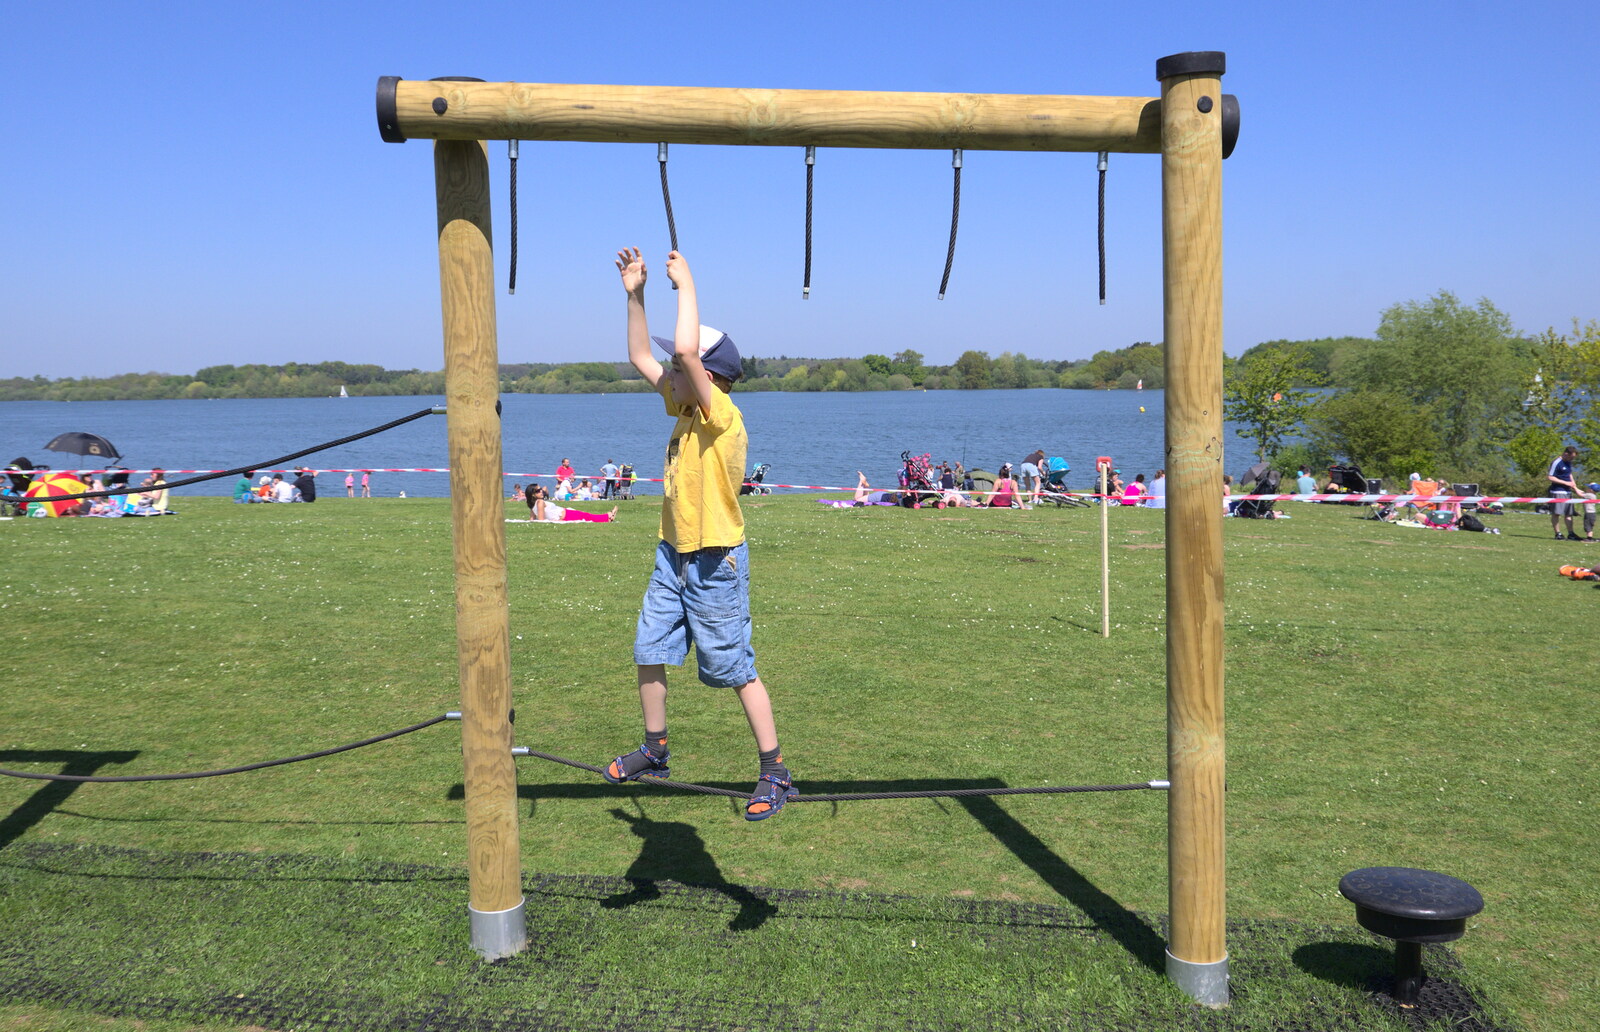 Fred on the playground from Isobel's 10km Run, Alton Water, Stutton, Suffolk - 6th May 2018